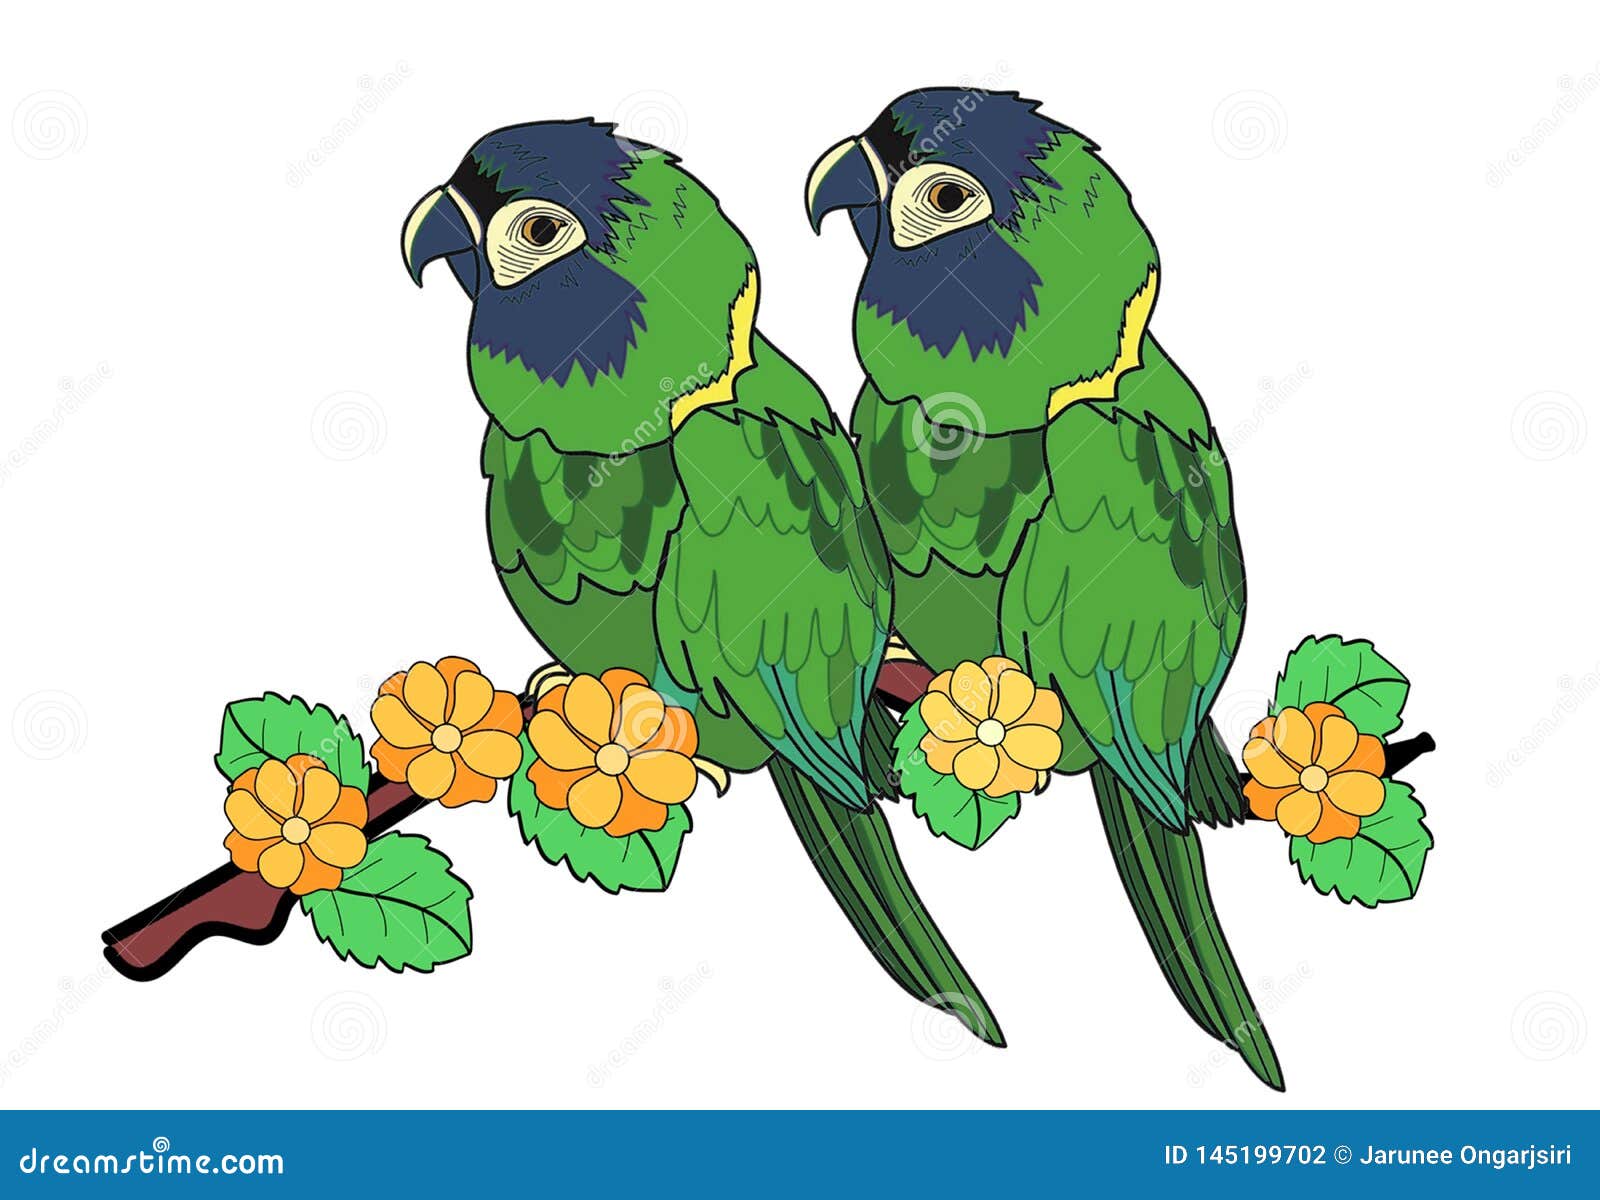 Cute Macaw Parrot Bird Love on Branch Art Stock Illustration - Illustration  of elements, color: 145199702